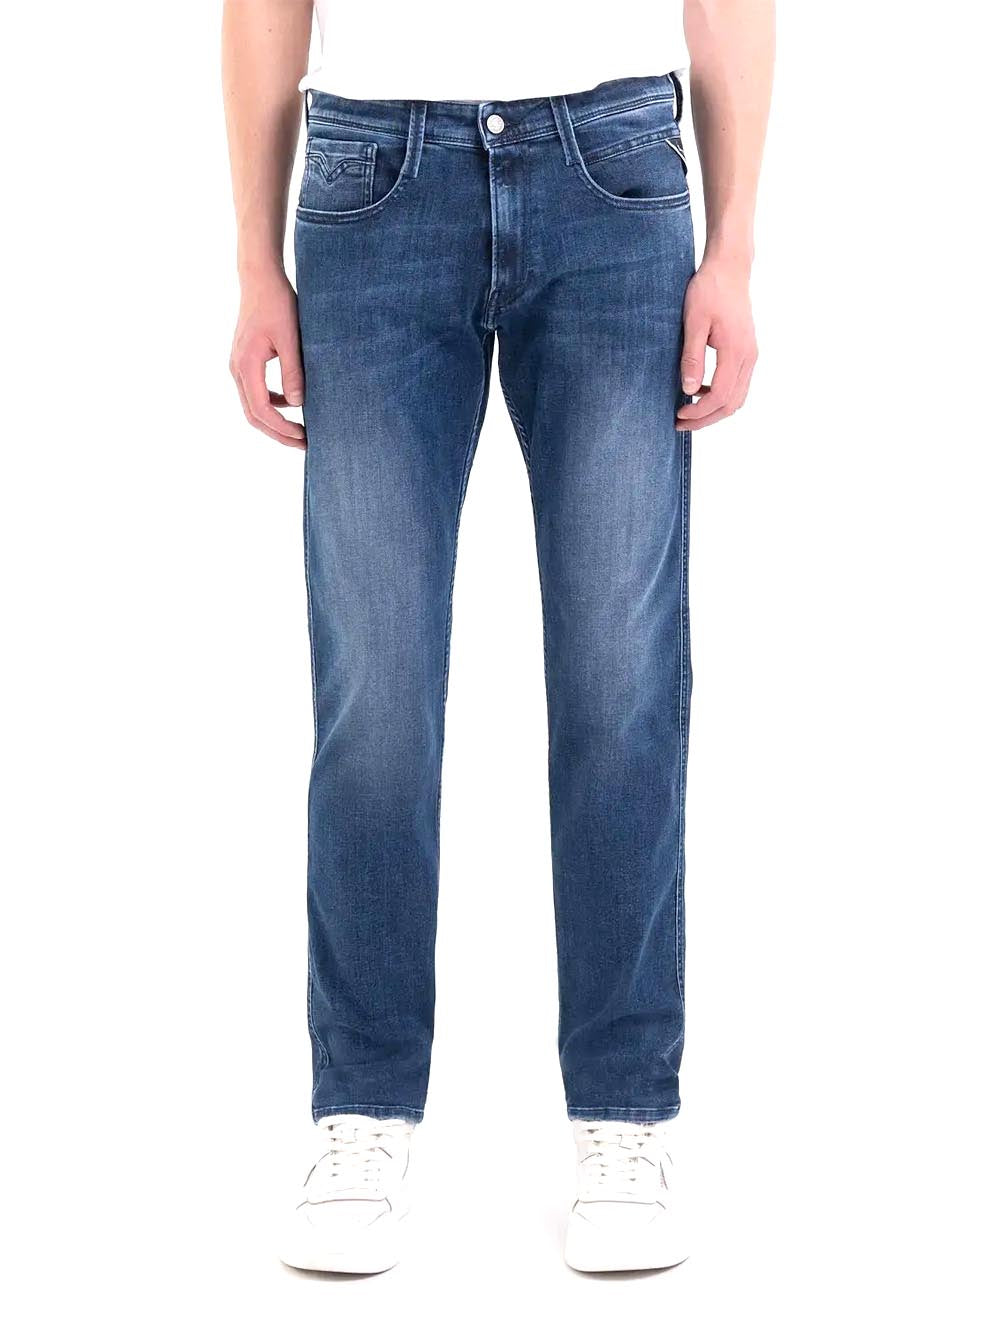 Replay Jeans Uomo M914y .000.41a 620 Scuro